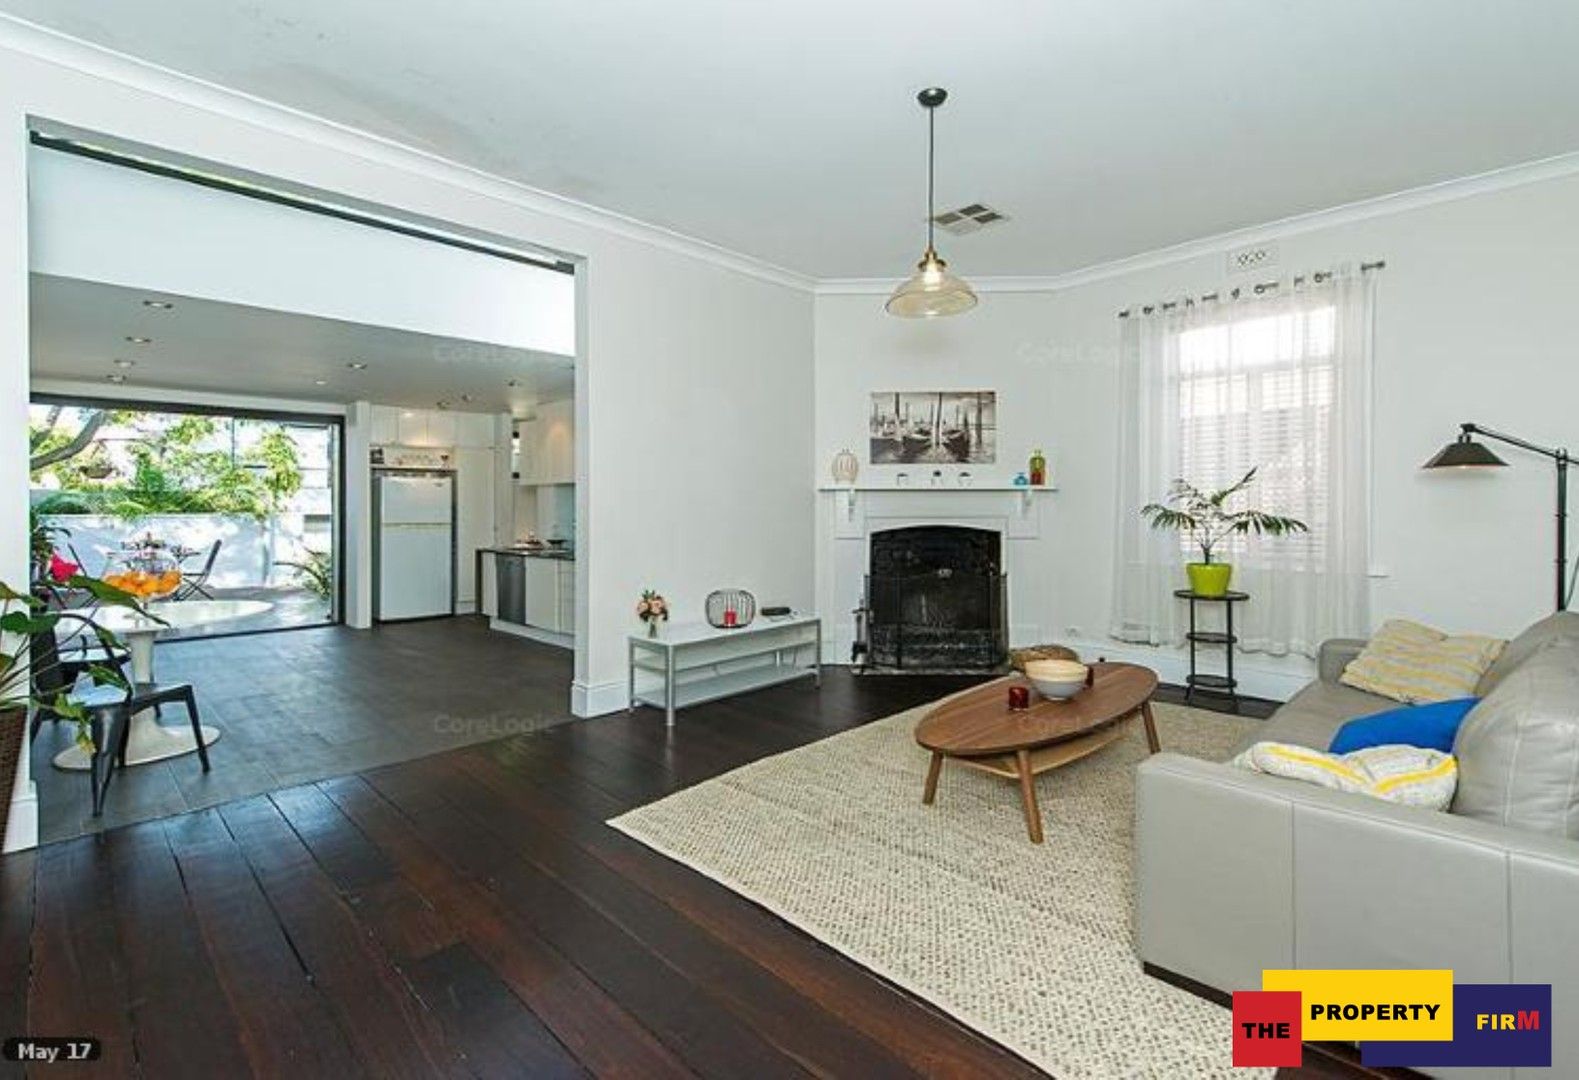 2 bedrooms House in Lane Street PERTH WA, 6000